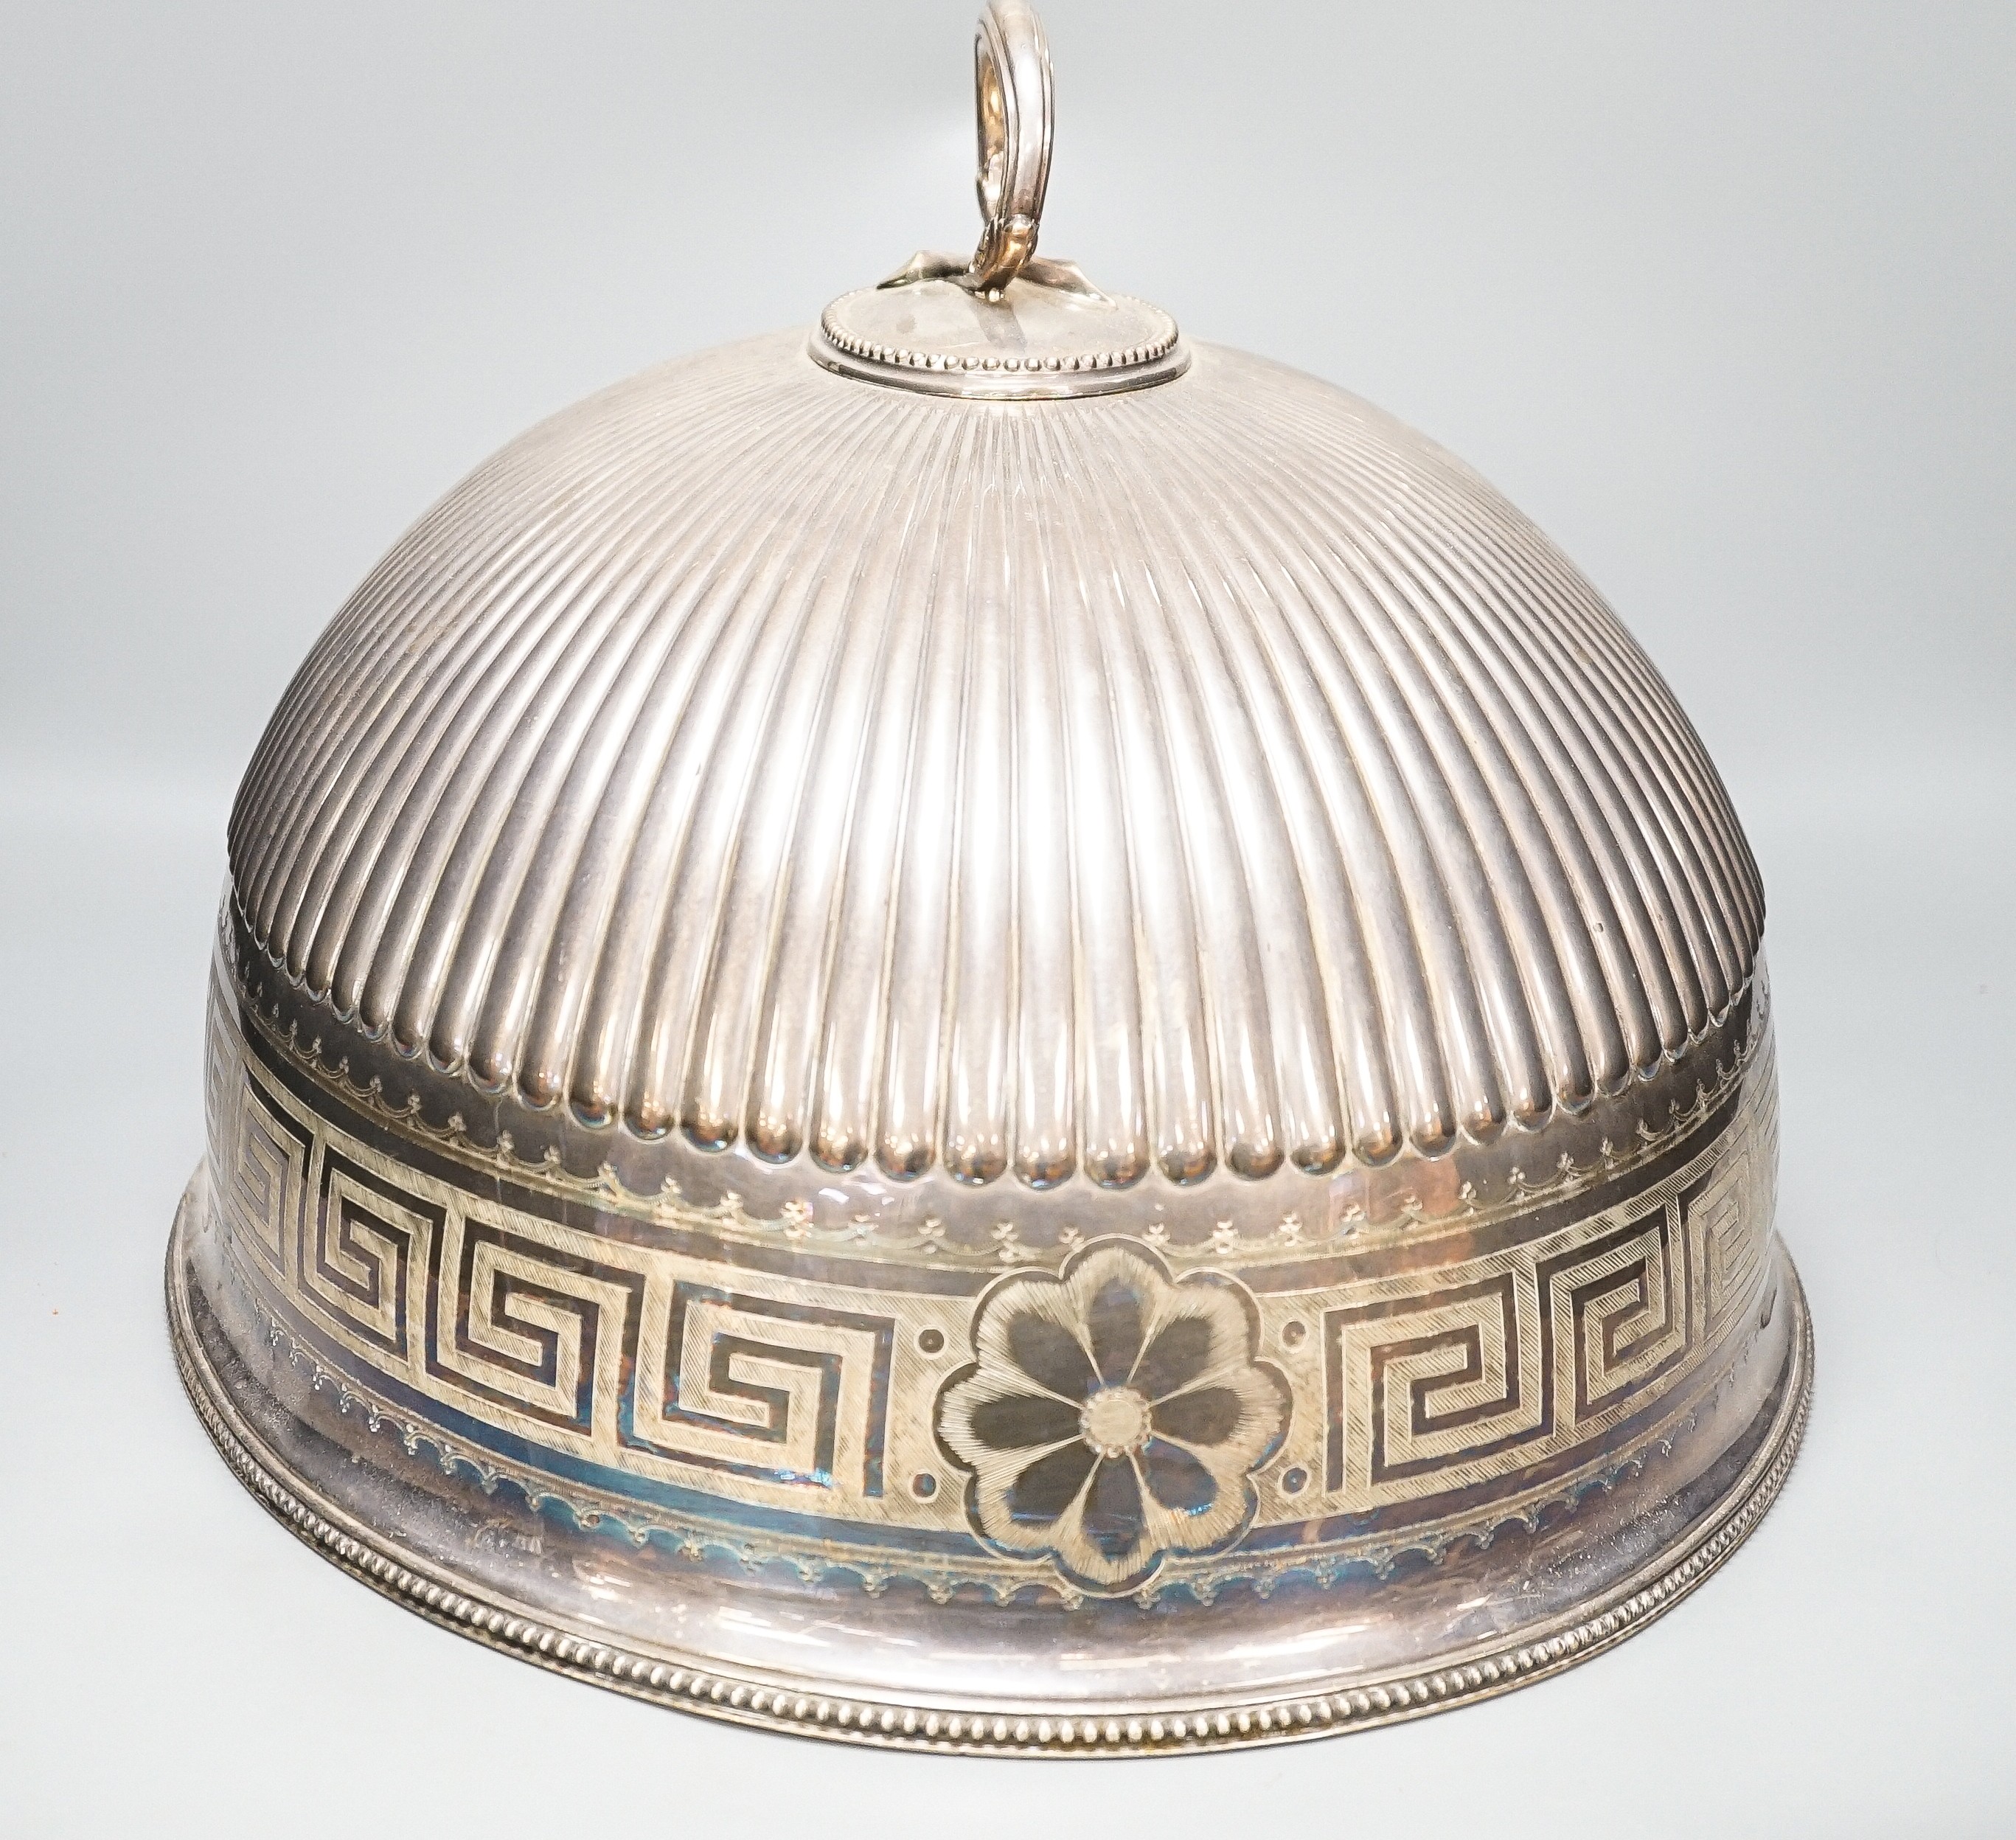 A large ribbed silver plated cloche/meat cover, 35 cms high including handle.